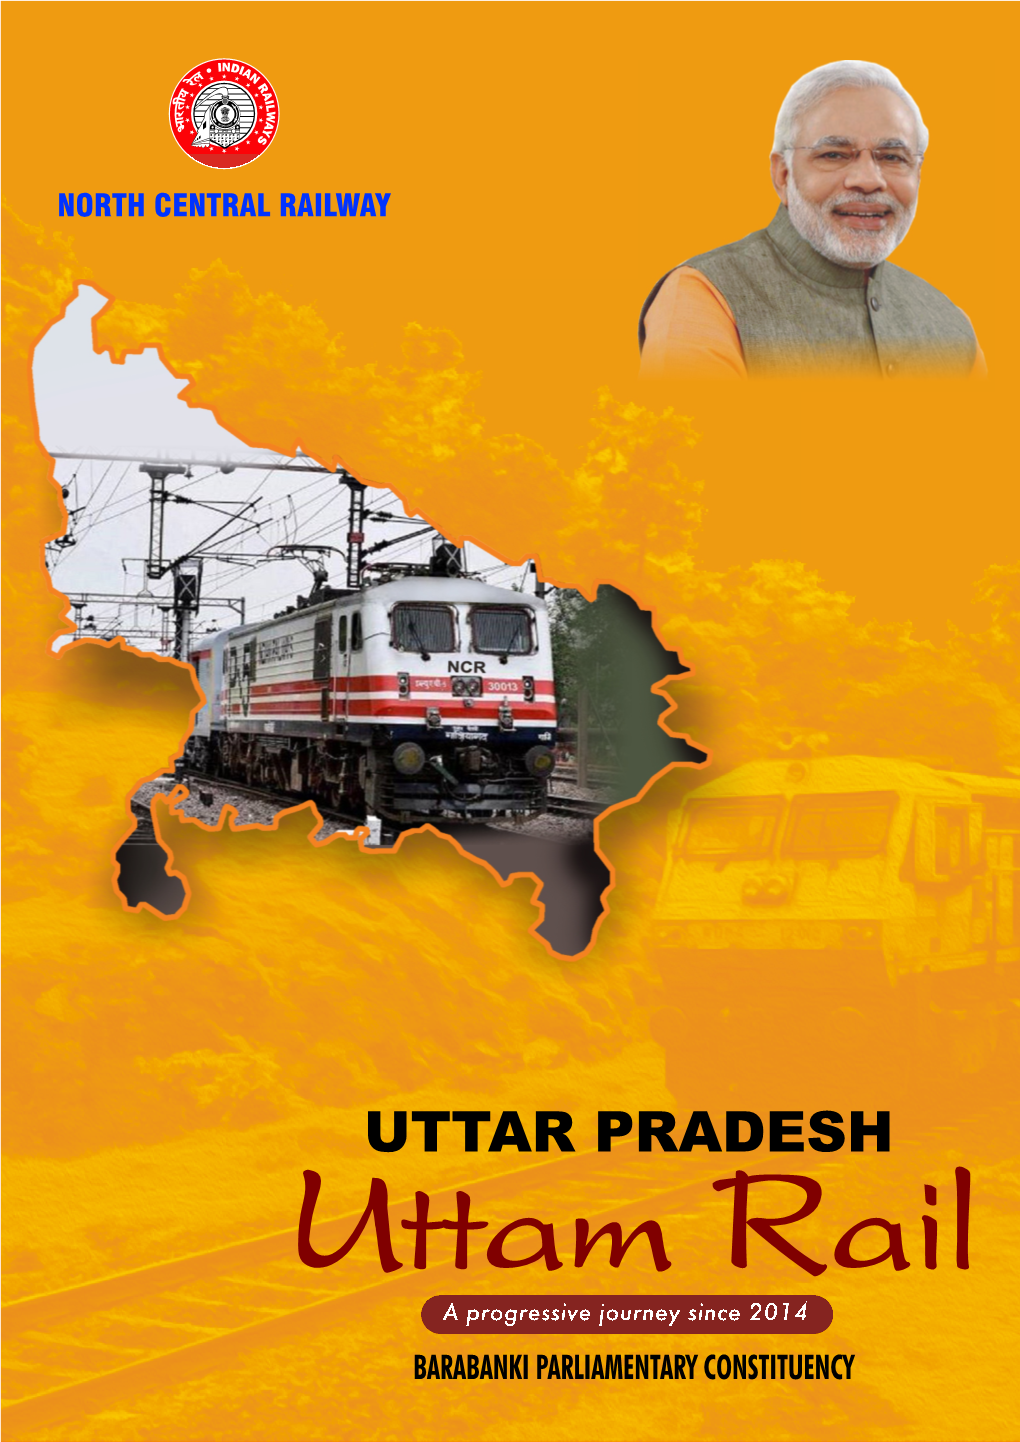 BARABANKI PARLIAMENTARY CONSTITUENCY Uttar Pradesh, the Most Populous State of Nation Is Served by North Central Railway Along with Northern, North Eastern M